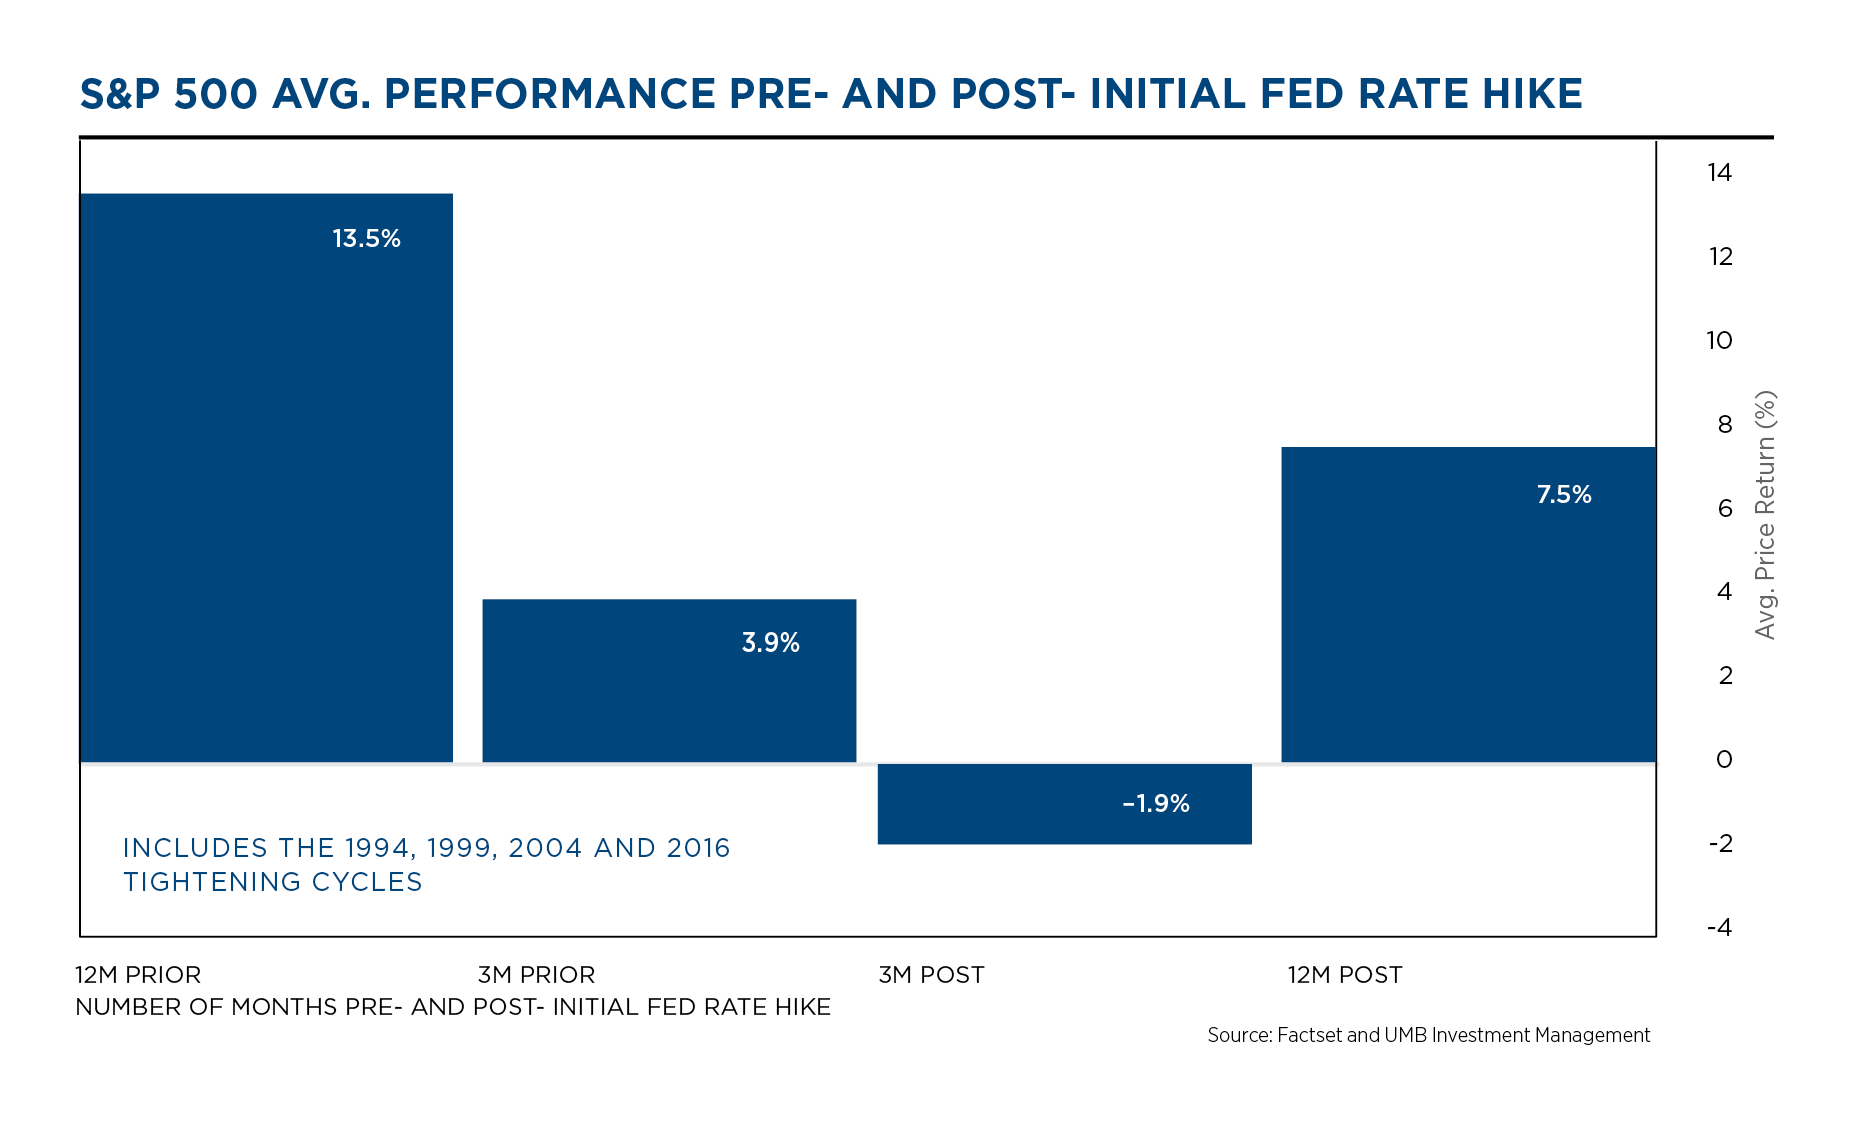 Avg performance pre and post fed hikes